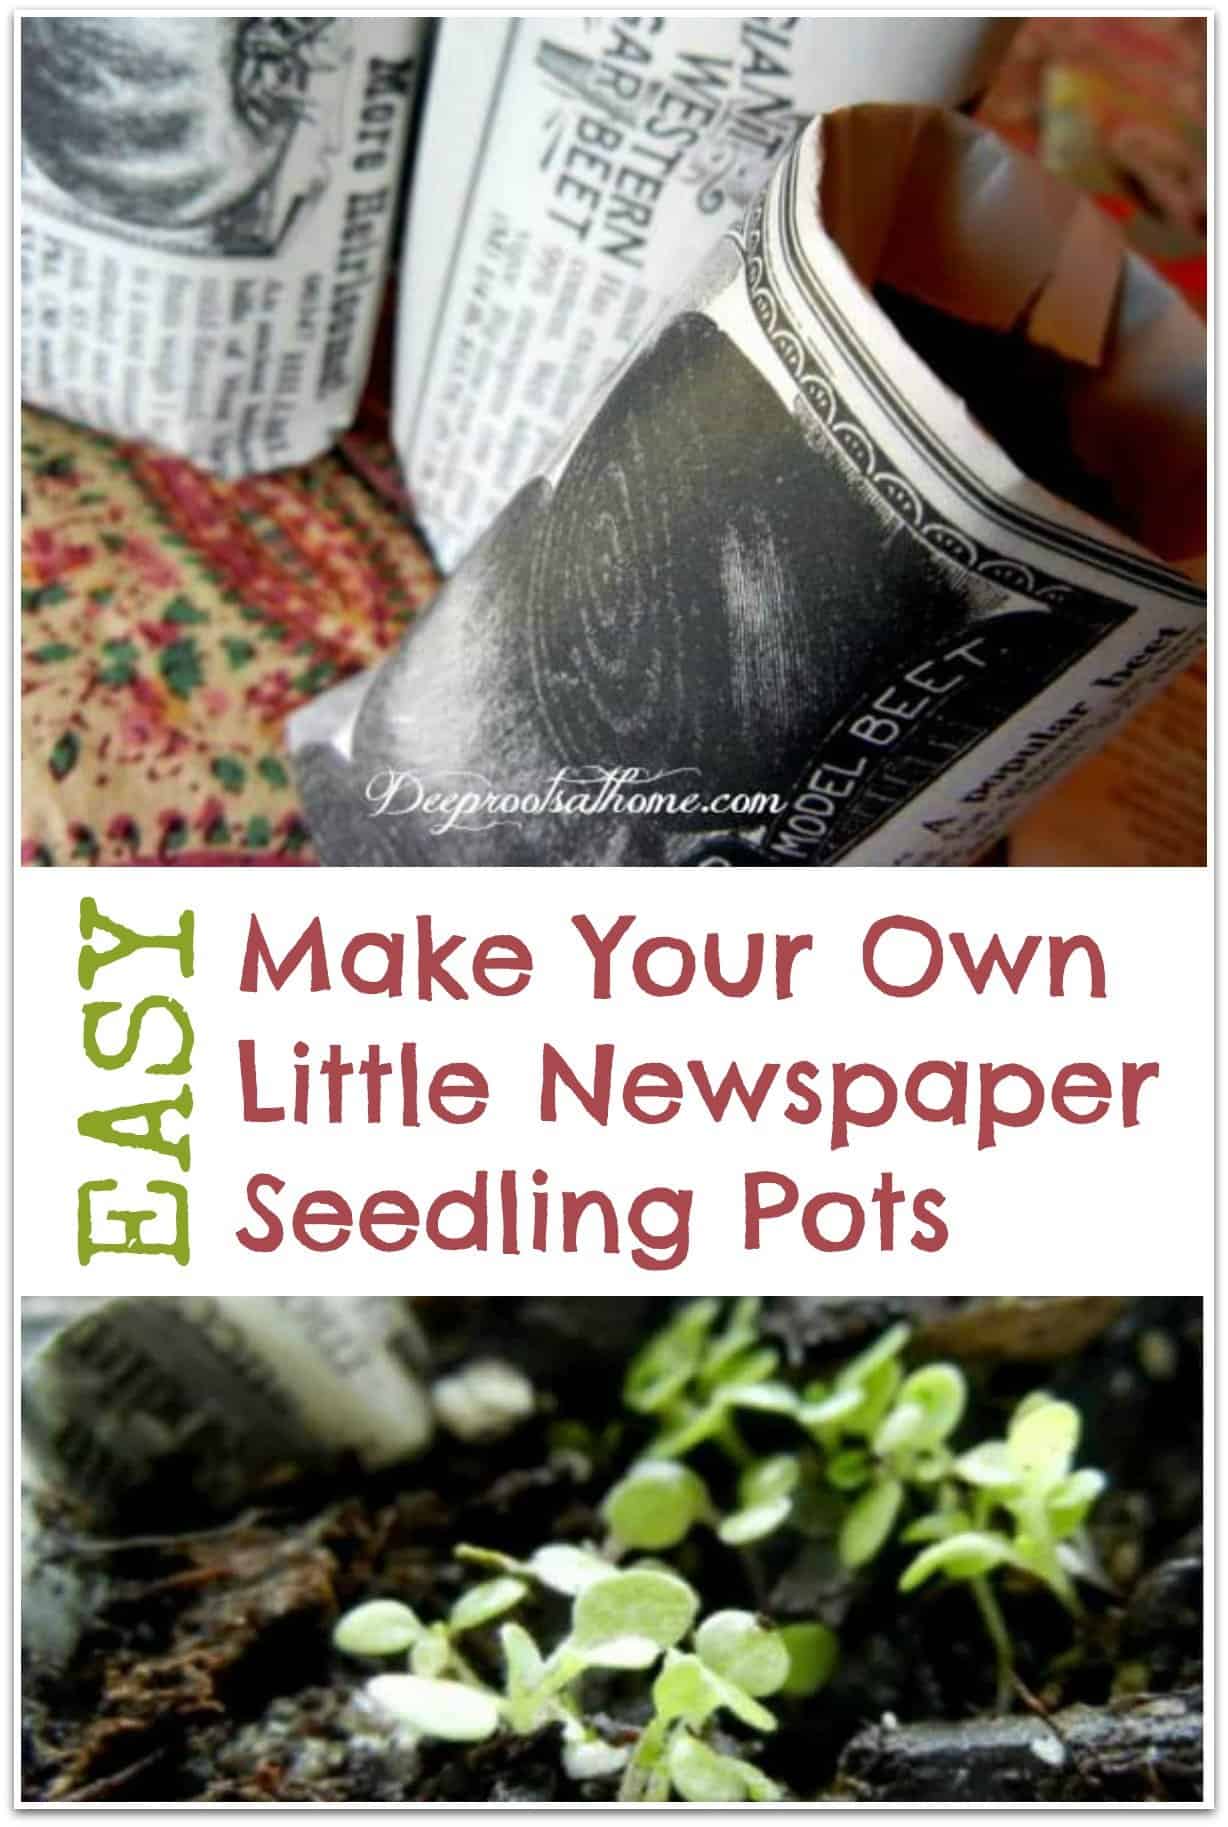 Easy To Make Your Own Little Newspaper Seedling Pots. potting soil in newspaper pots